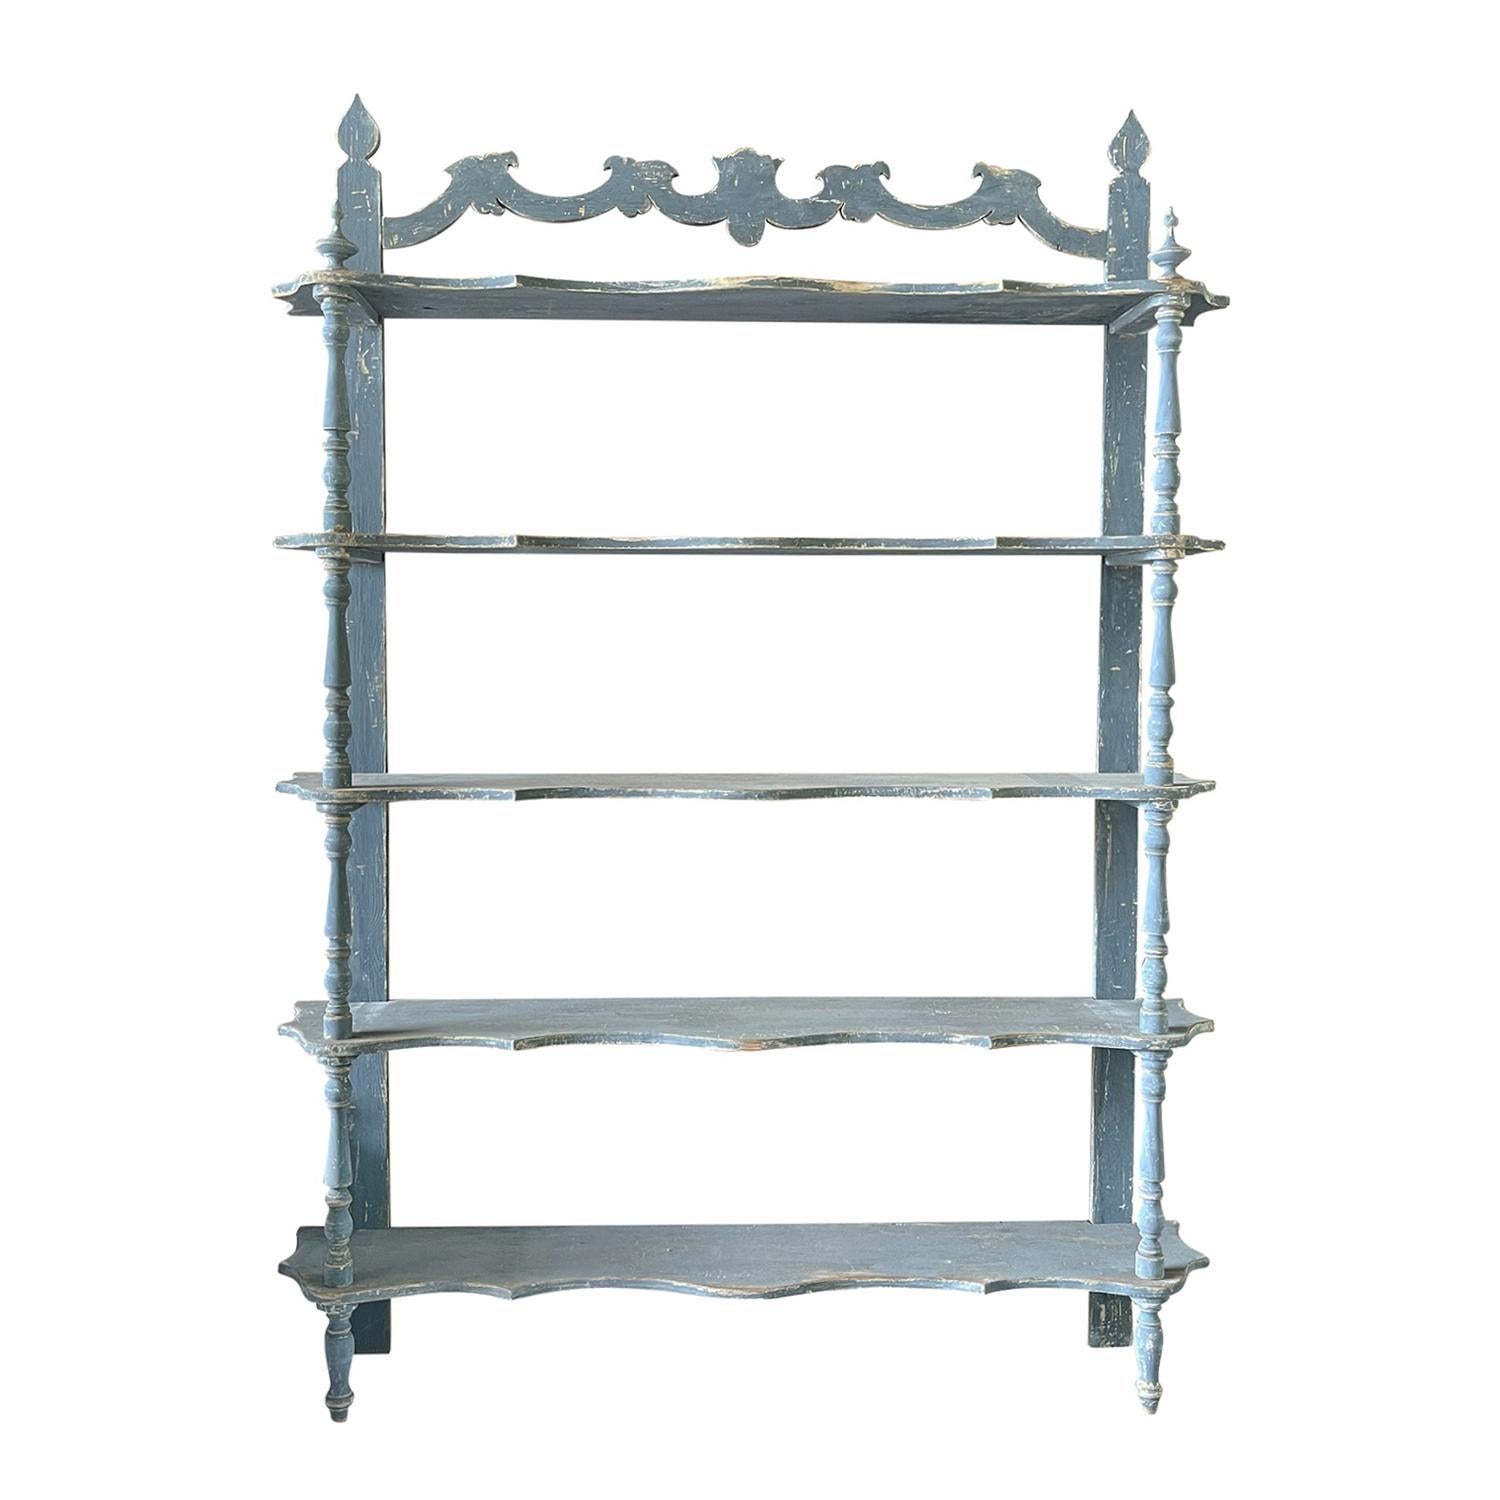 18th - 19th Century French Painted Pinewood Bookshelf - Antique Rack In Good Condition For Sale In West Palm Beach, FL